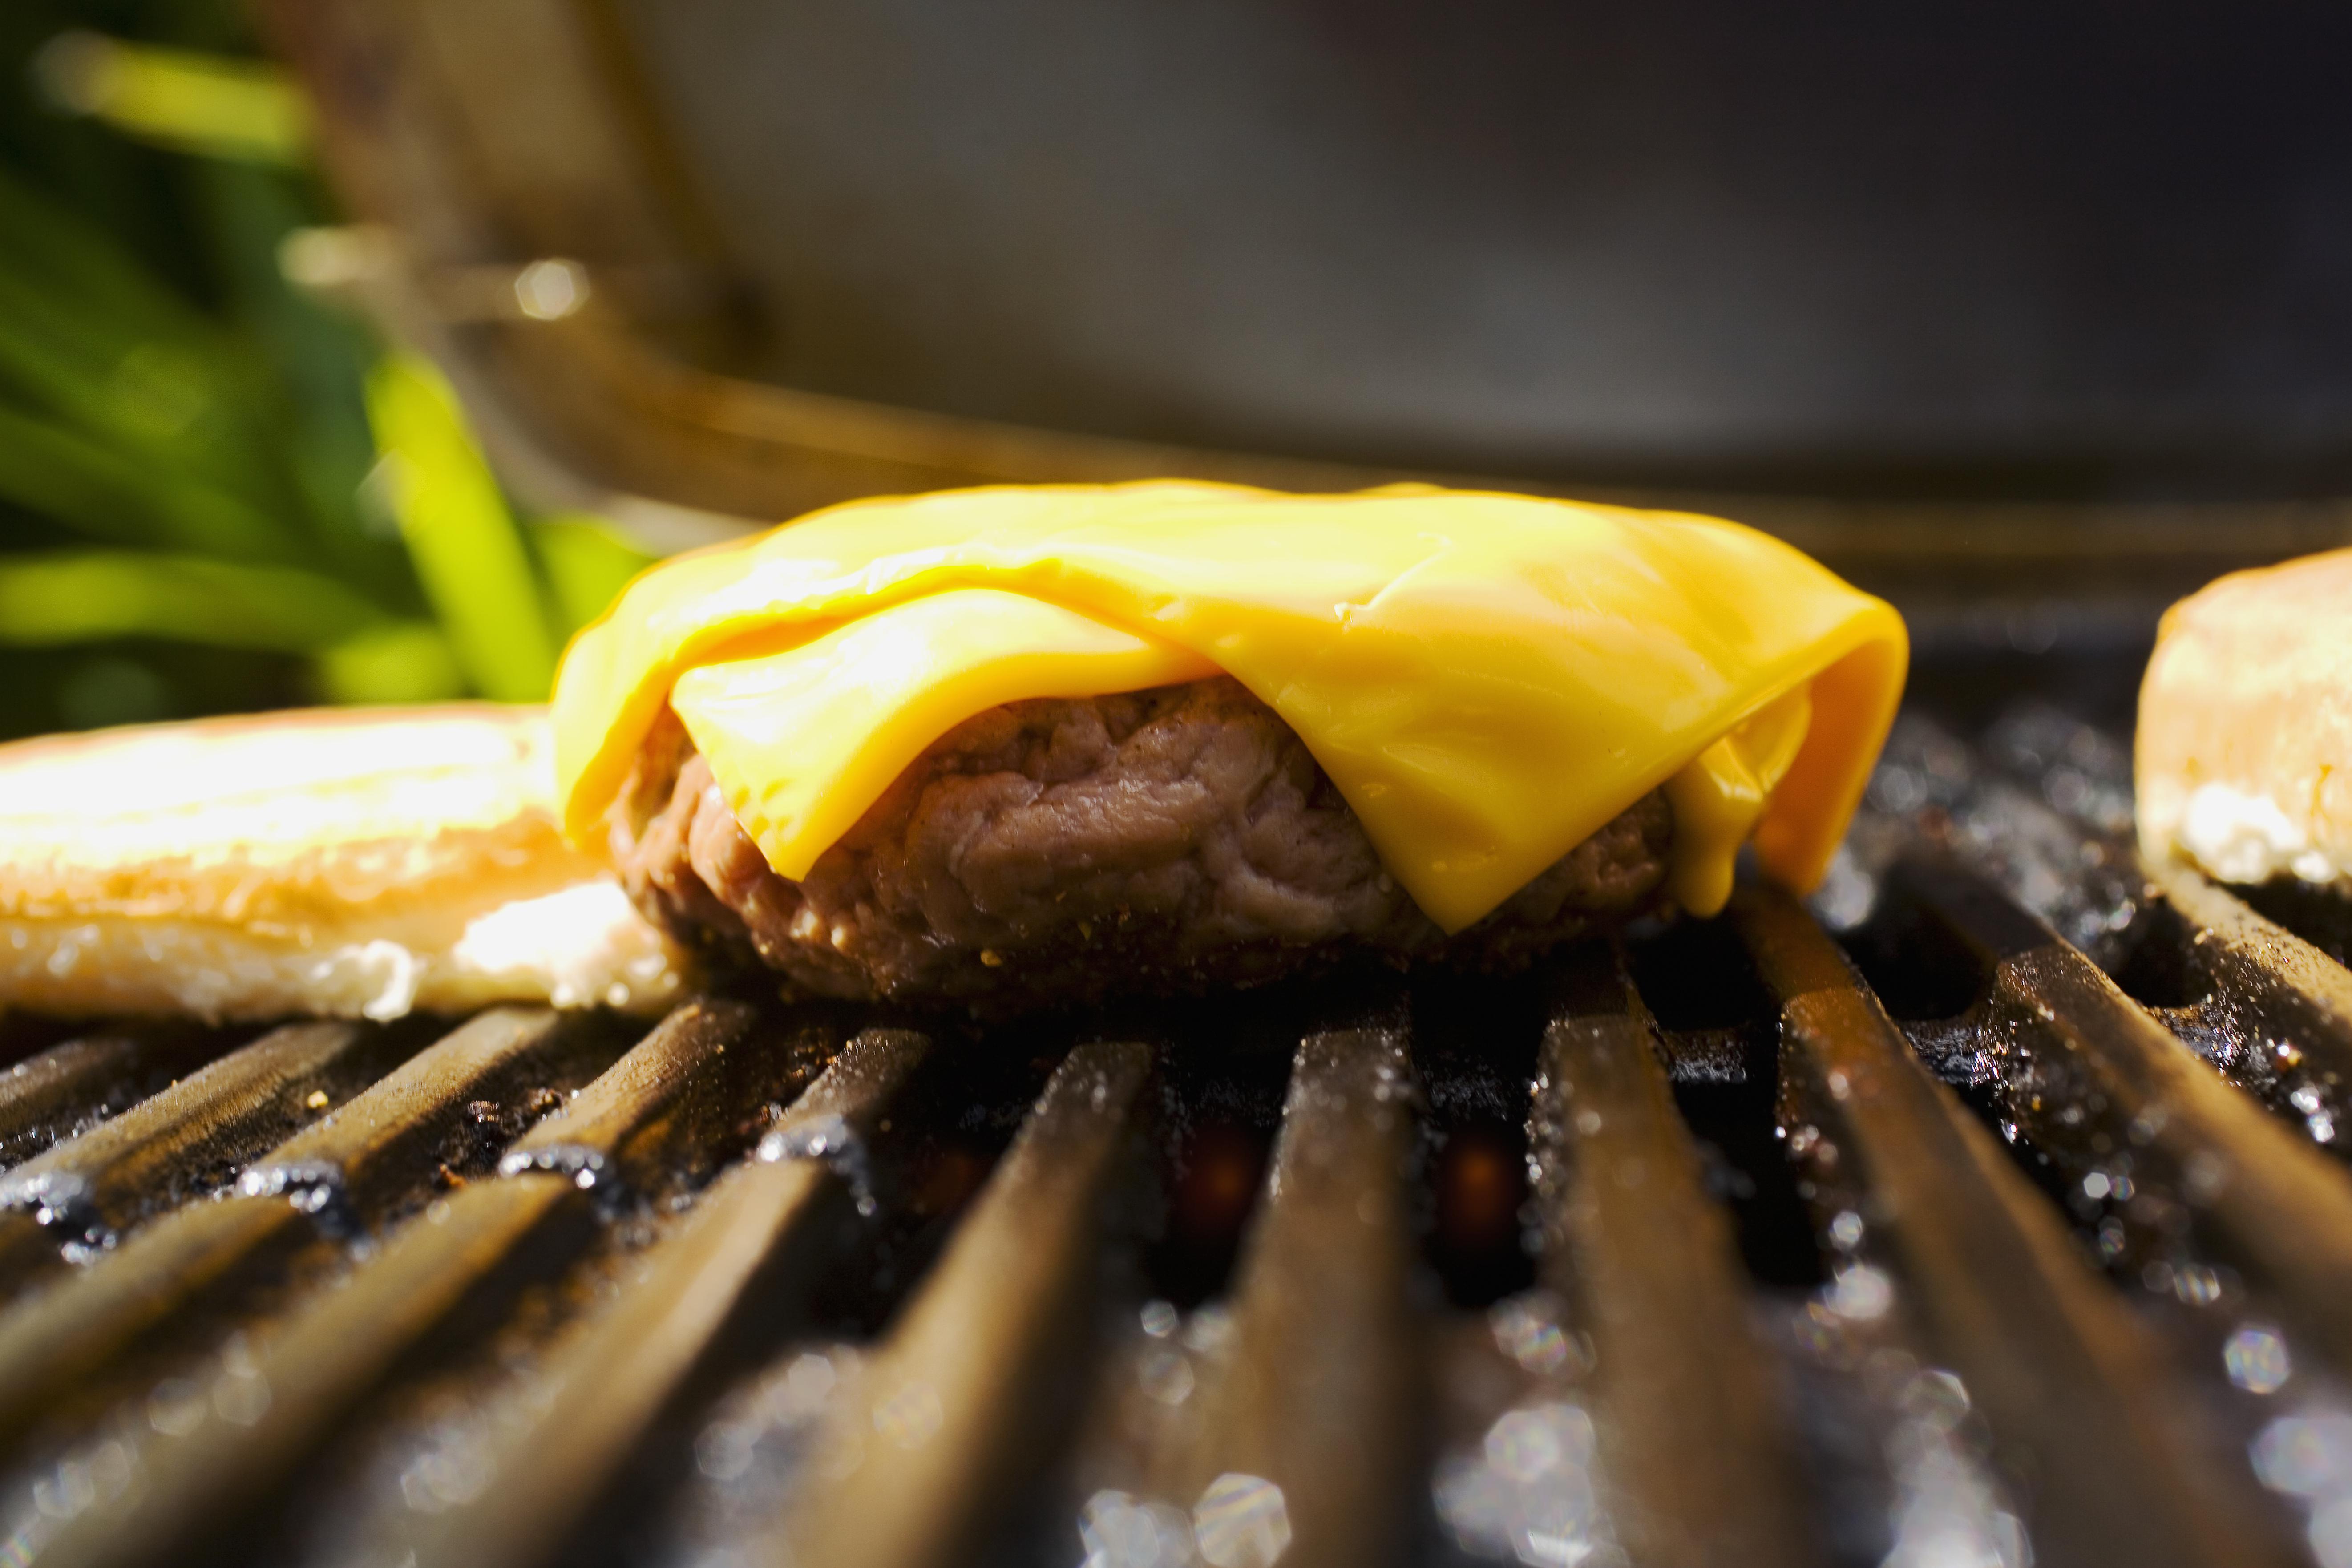 Barbecue scene, cheeseburger on the grill.